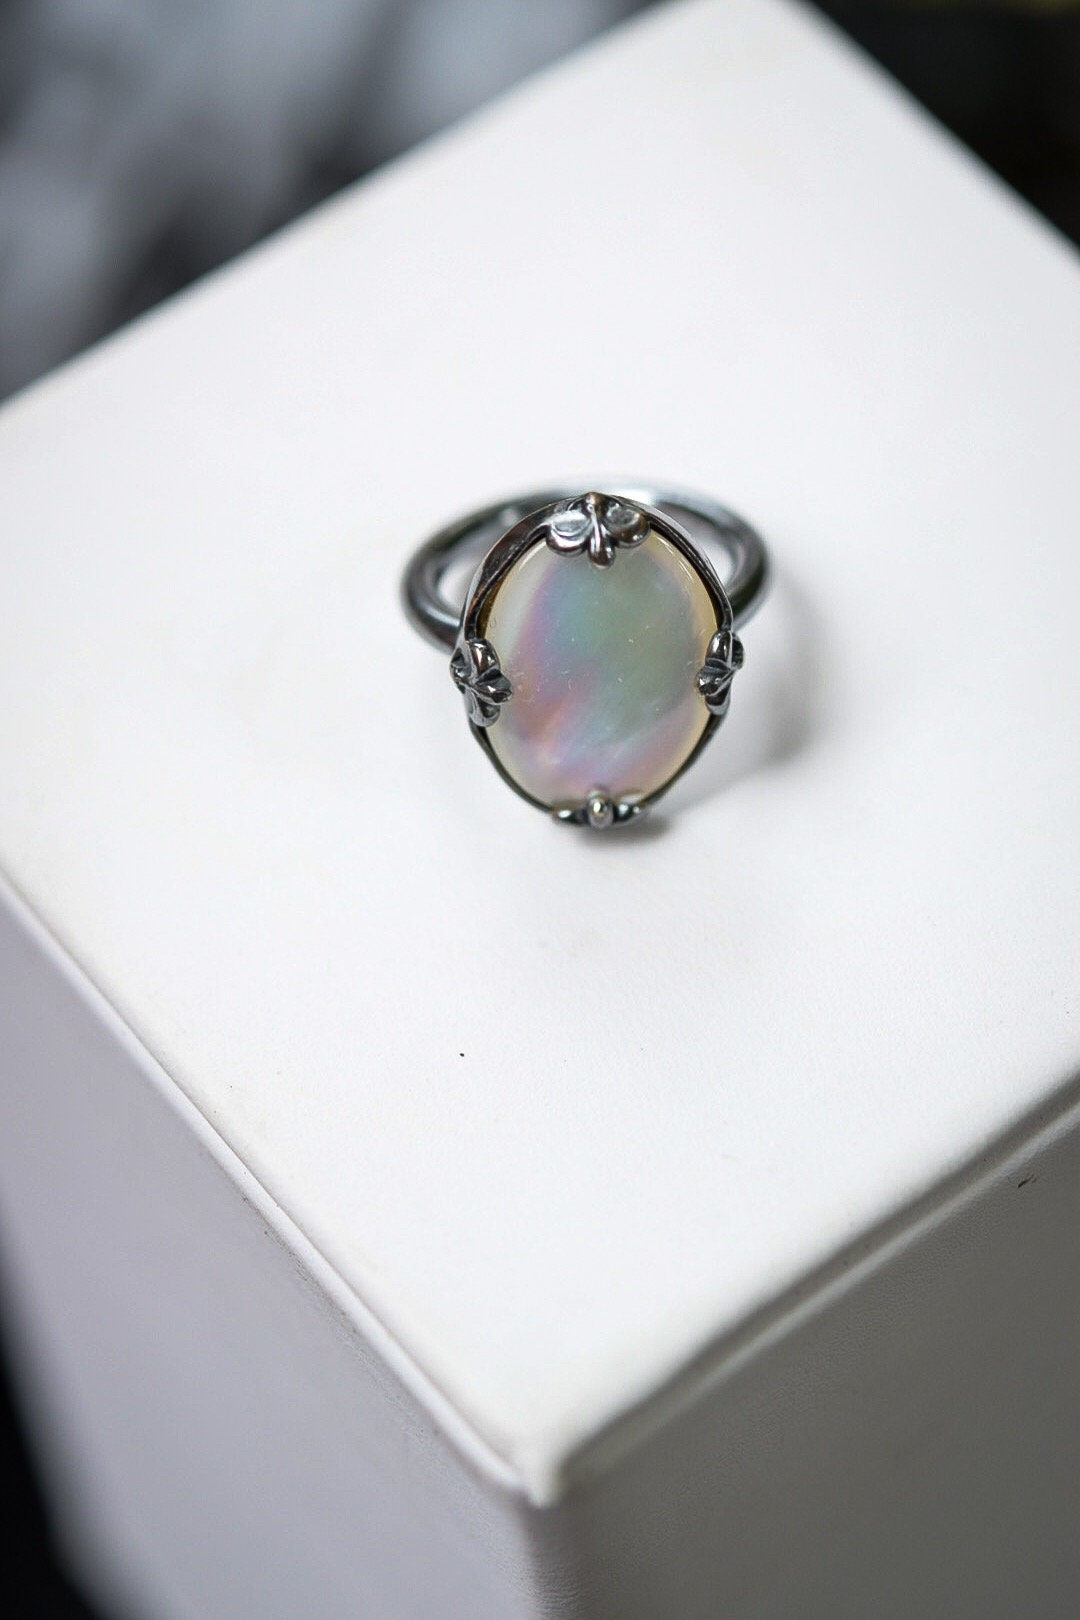 White Mother of Pearl Ring/ Sterling Silver/ Mirror, Mirror Ring/ pearlescent